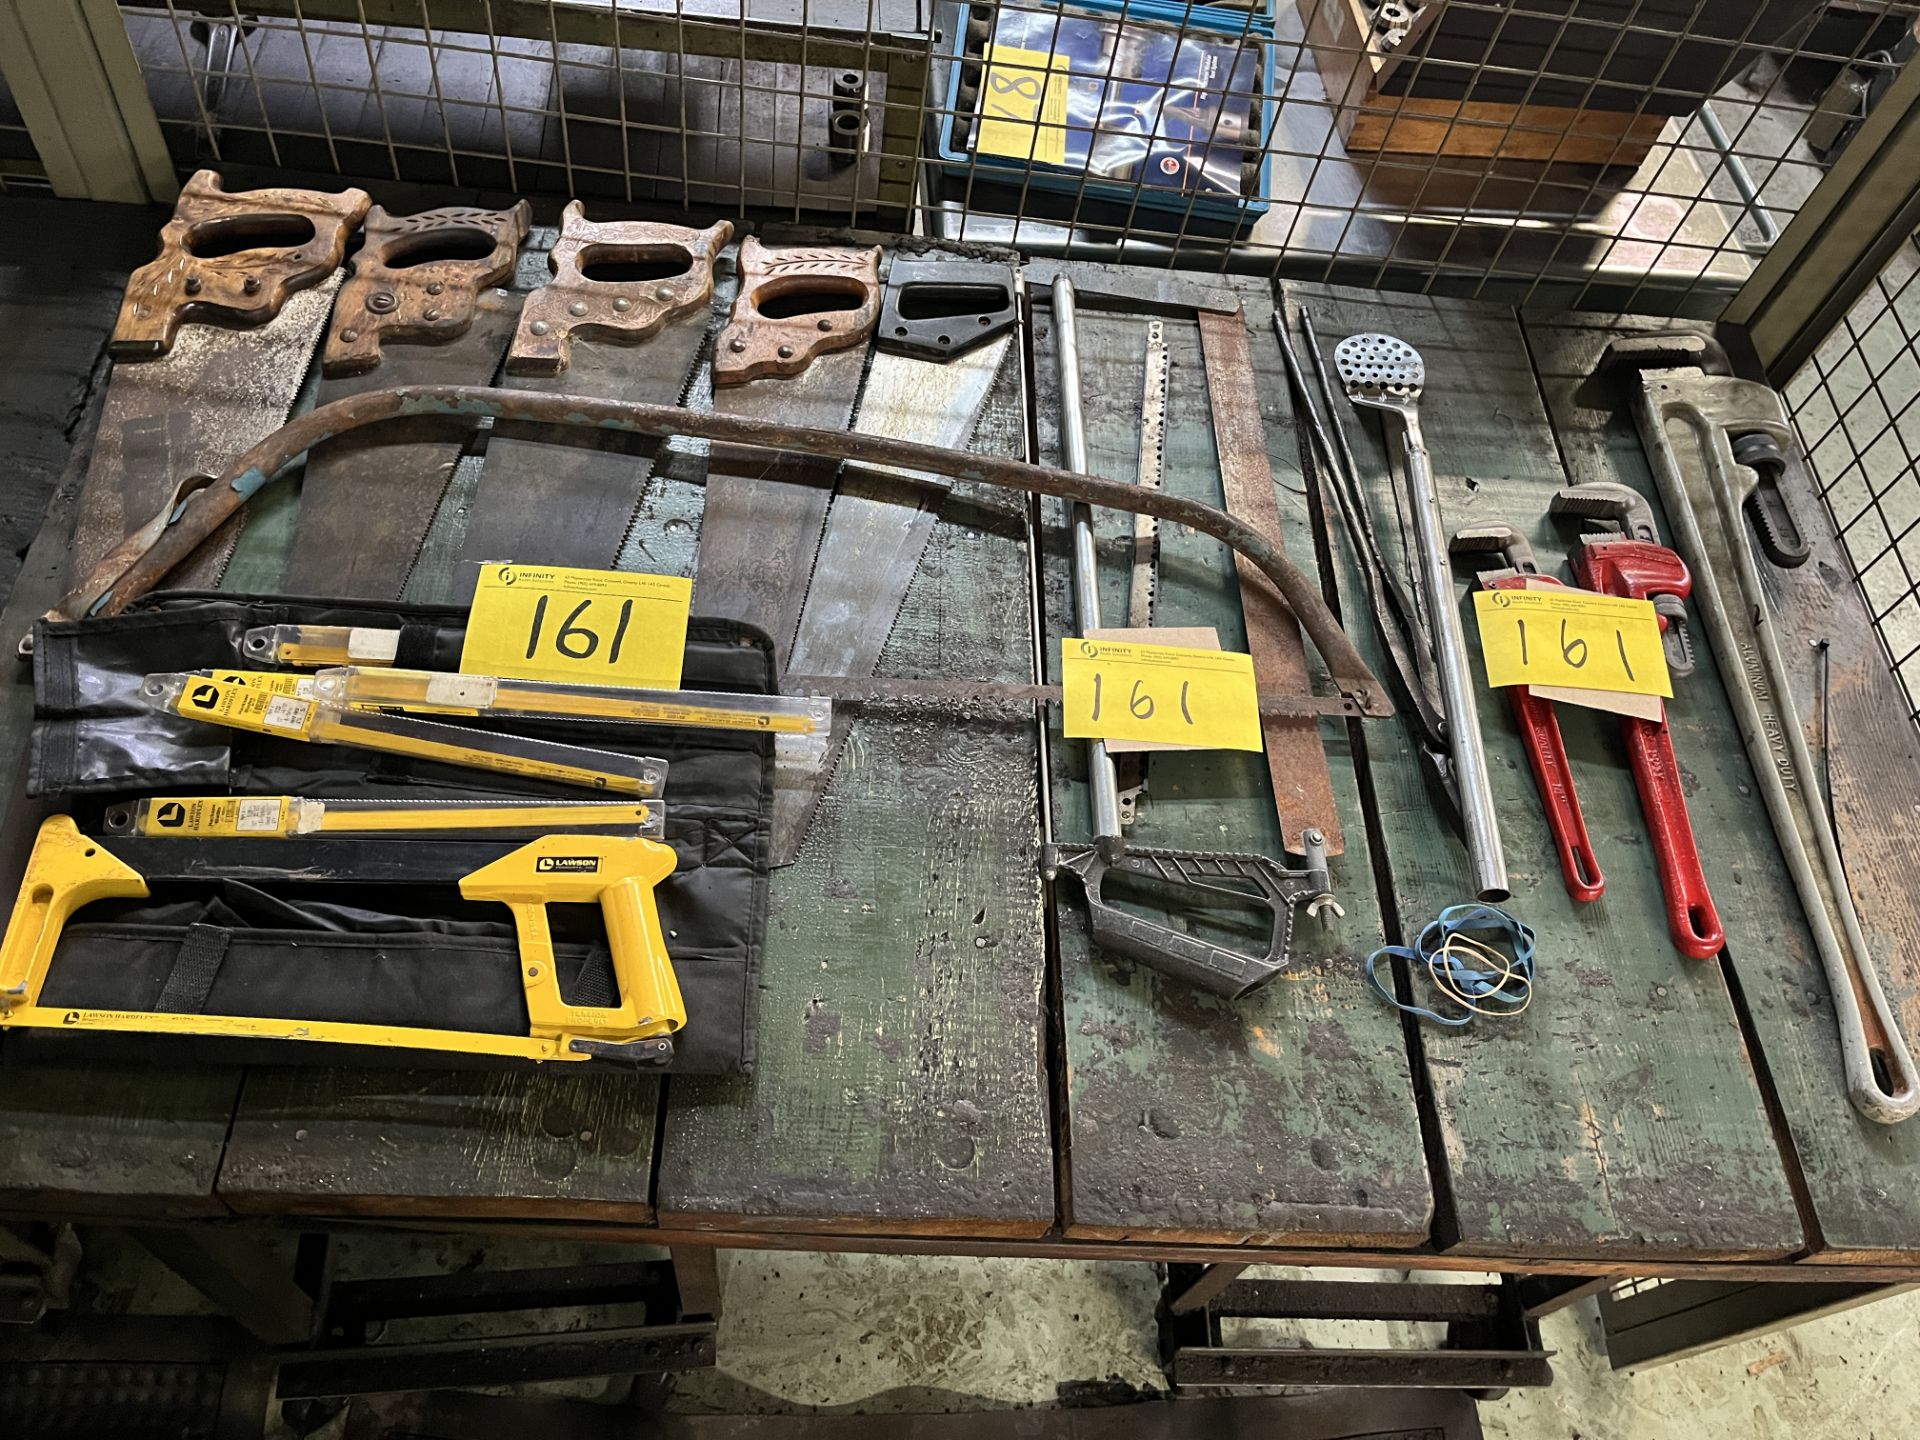 LOT OF SAWS AND PIPE WRENCHES